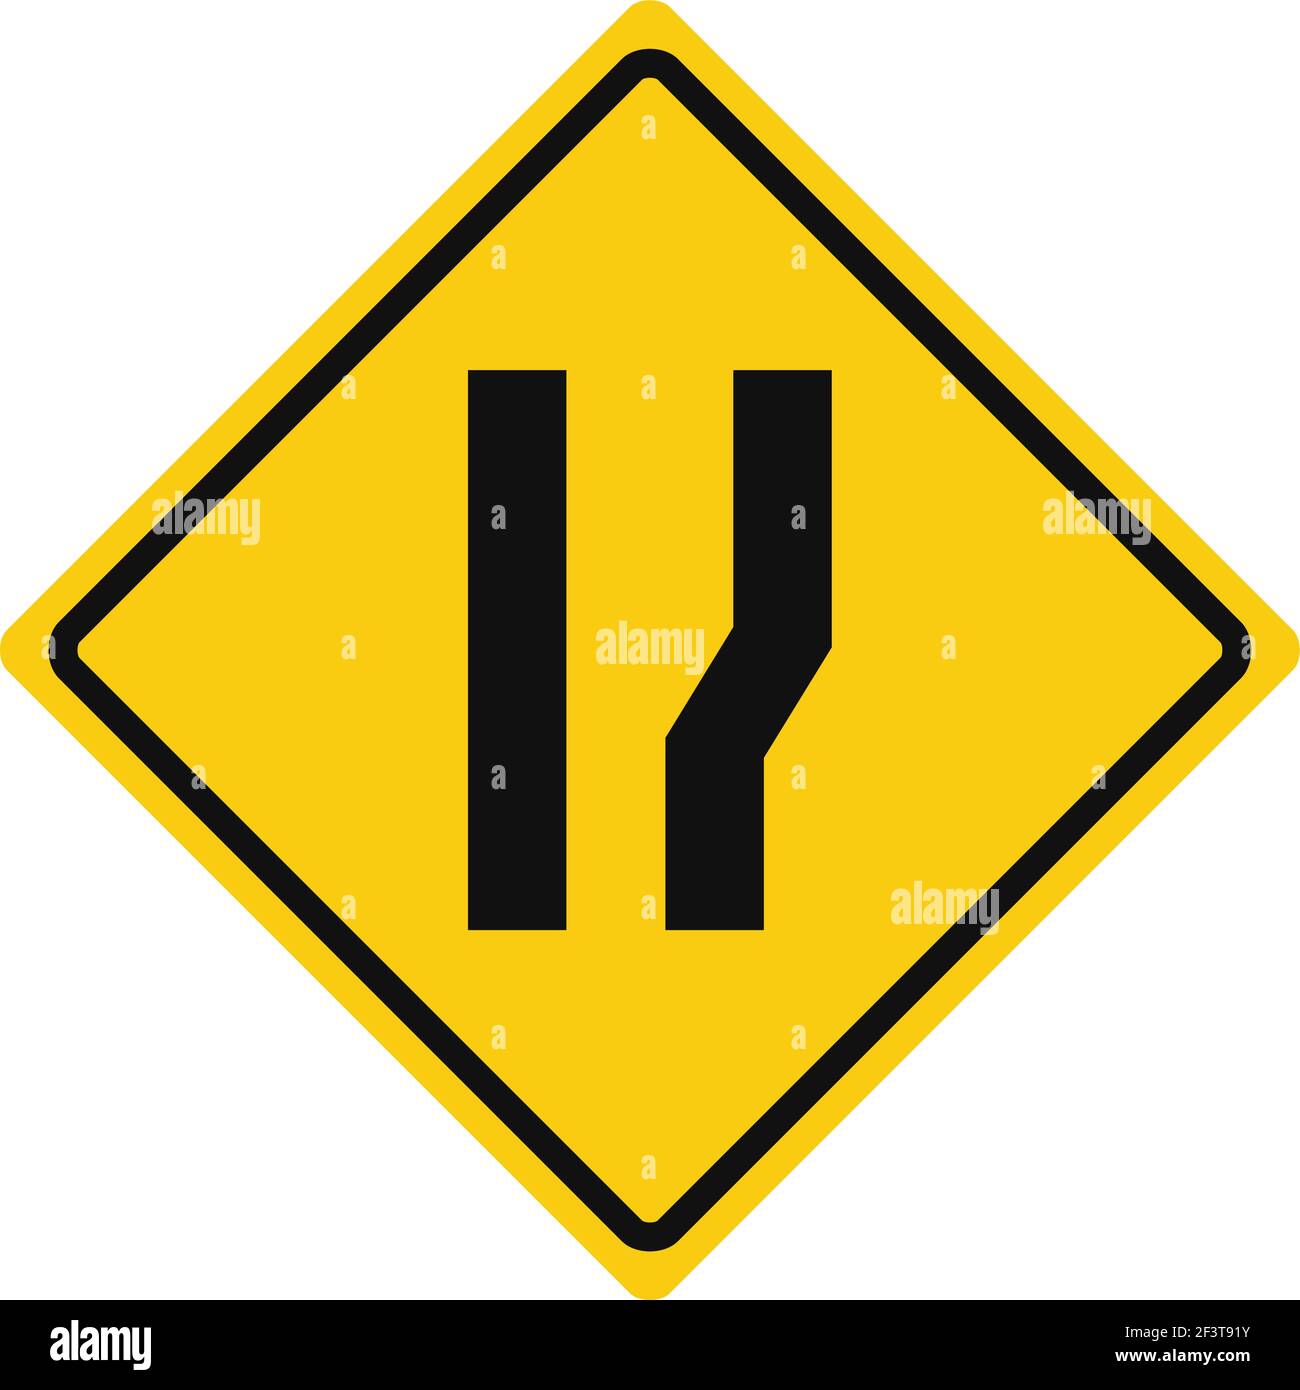 Rhomboid traffic signal in yellow and black, isolated on white background. Warning of wide road ahead on right side Stock Vector